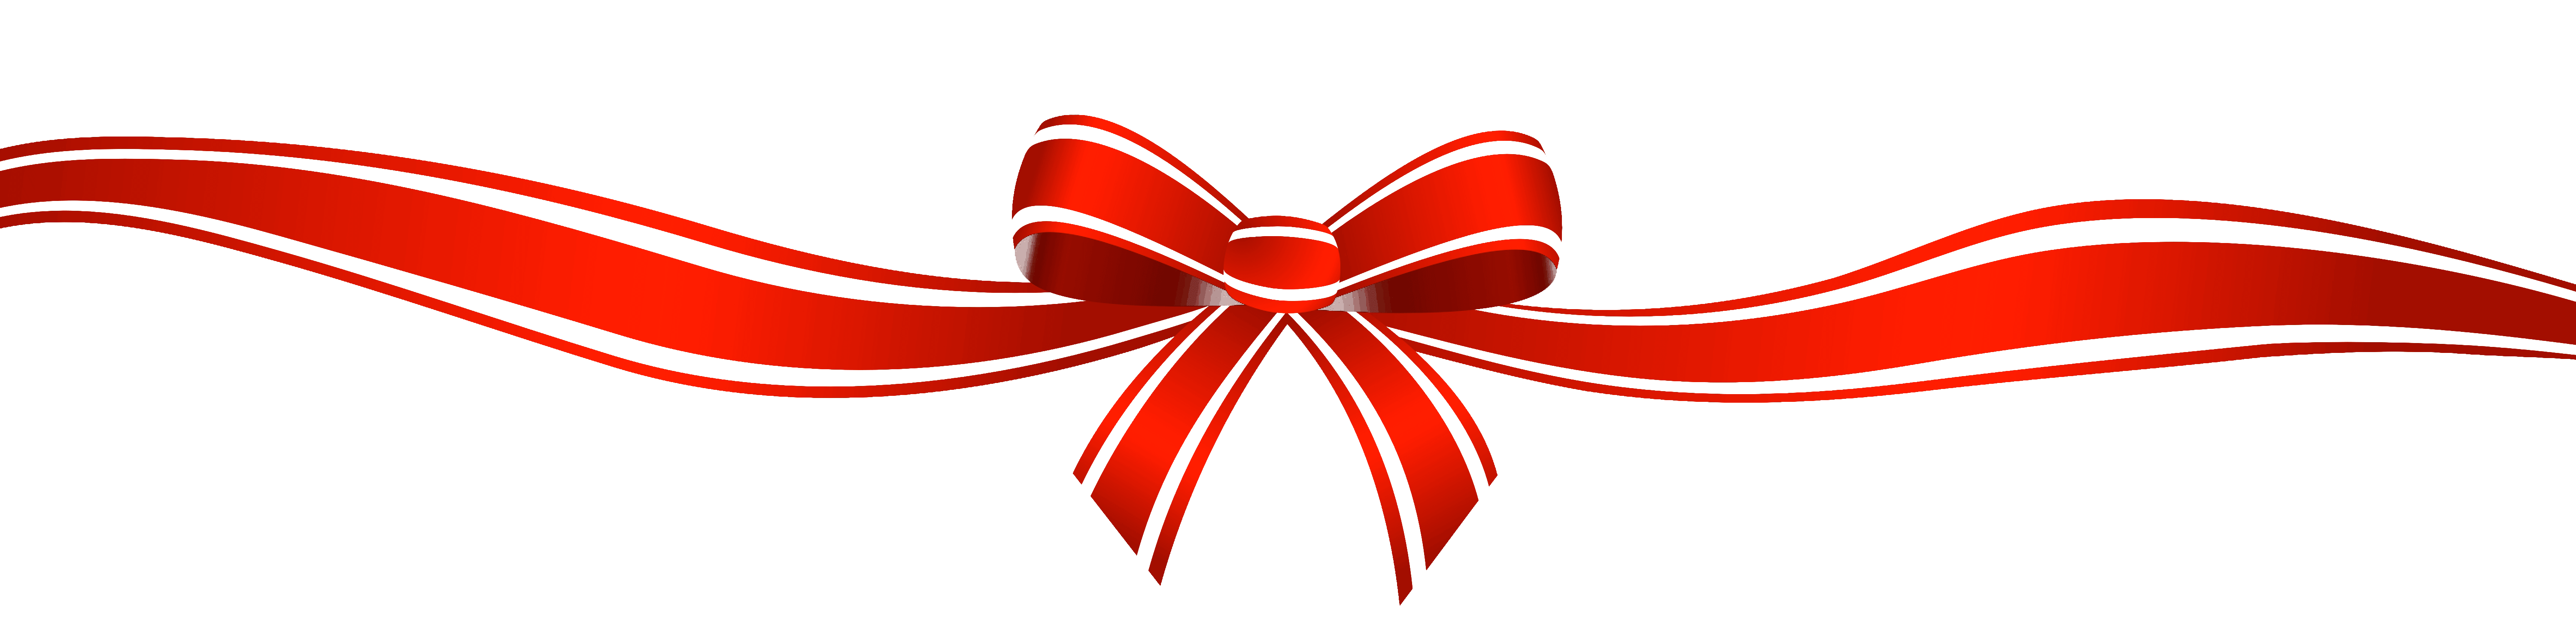 Gift Ribbon Png   Clipart Best